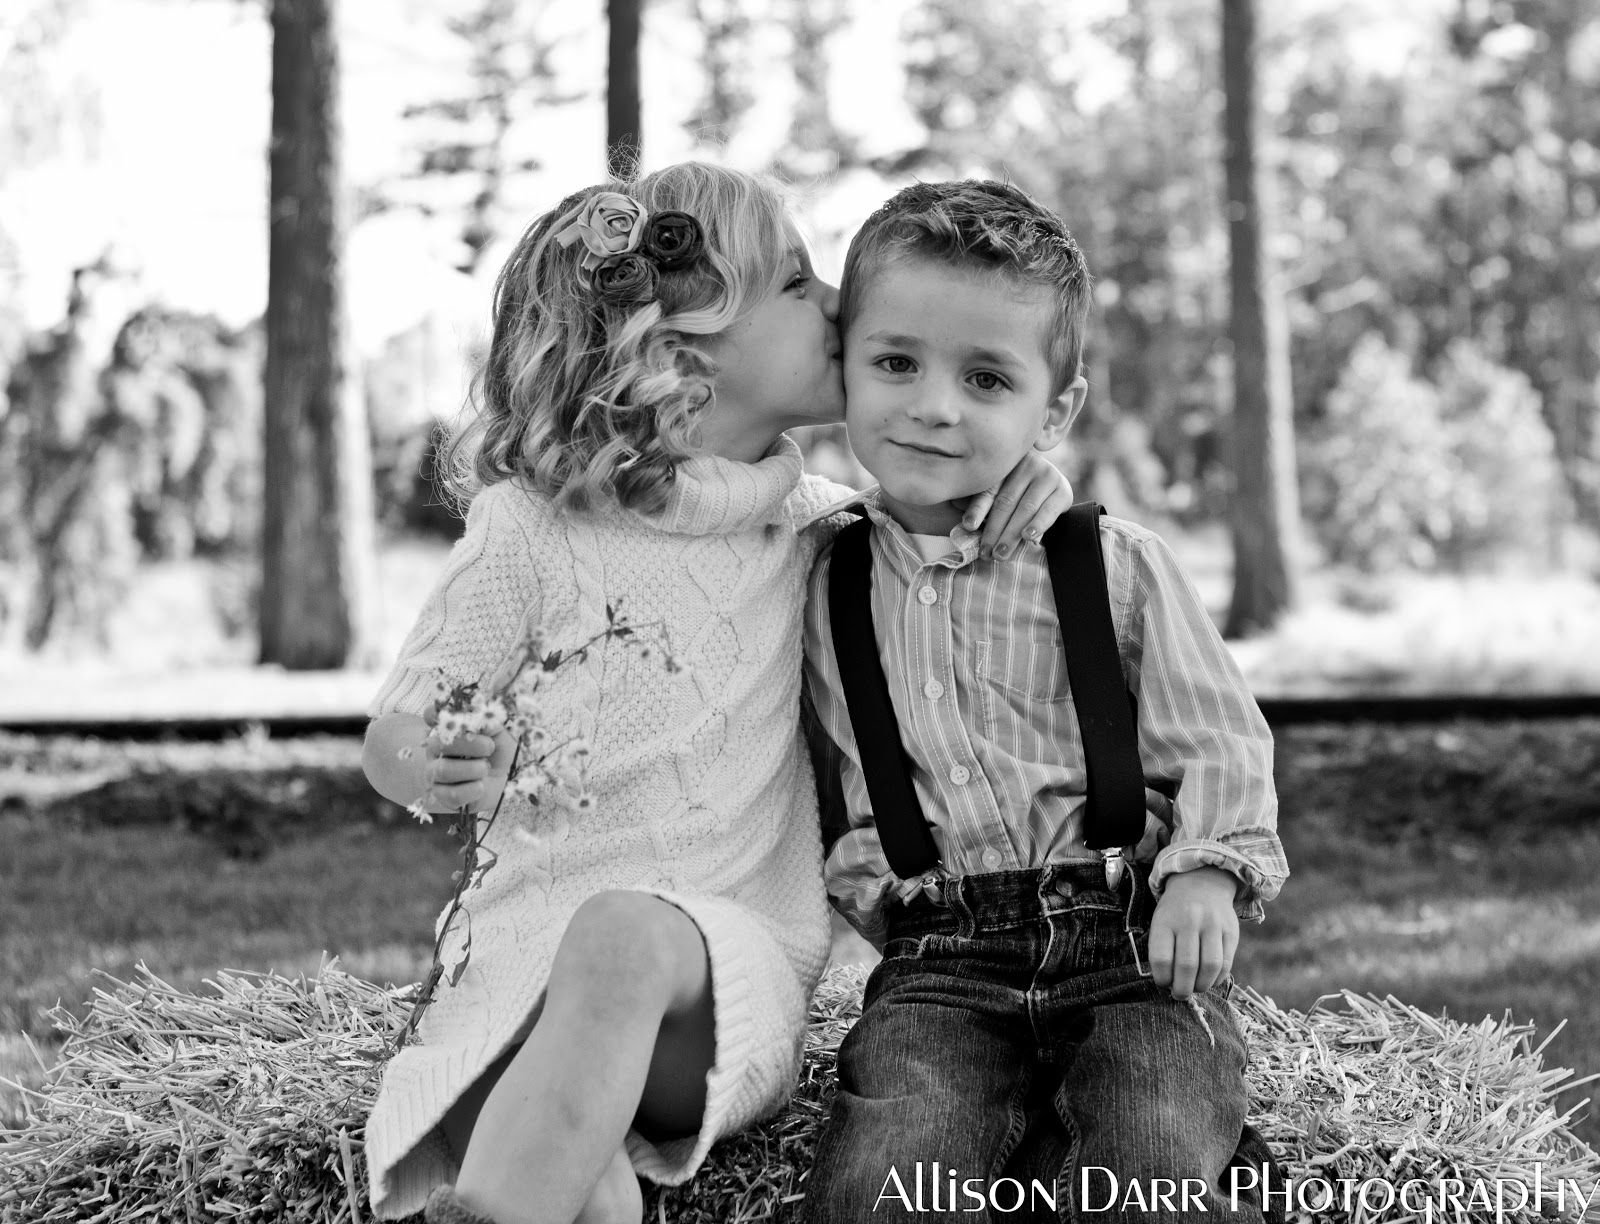 10 Amazing Brother And Sister Picture Ideas allison darr photography brother and sister love photo ideas 2022